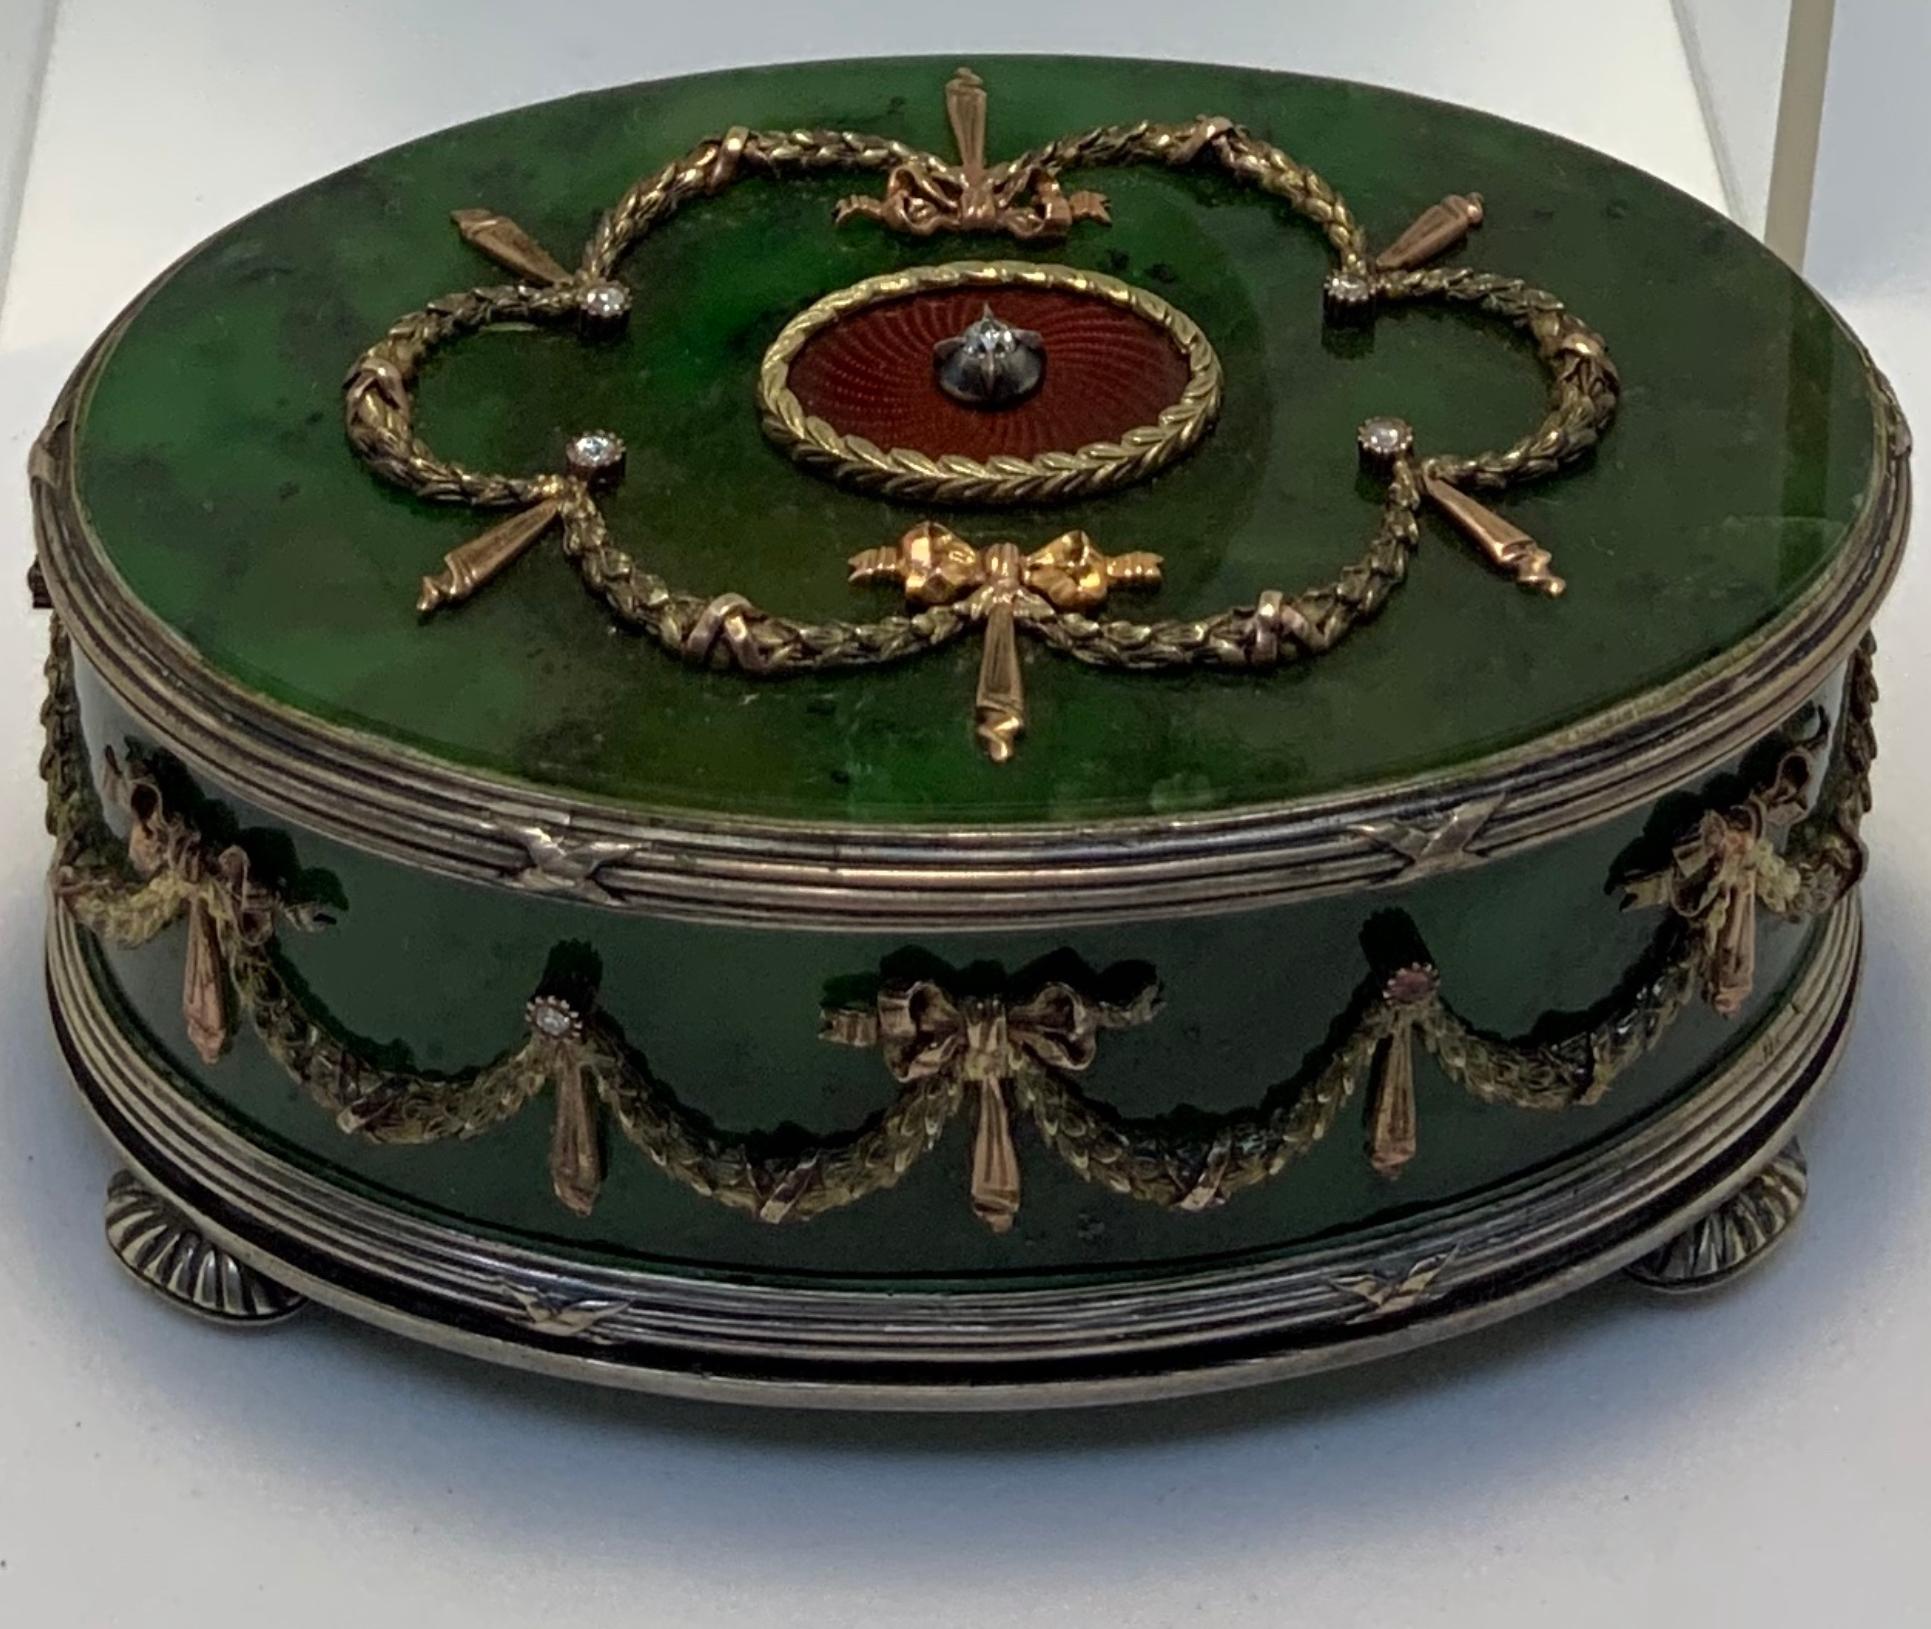 An oval footed trinket box which is bearing the Faberge Imperial Russian silver hallmark Cyrillic characters, and made in the St. Petersburg workshop. During the late 1800s, there were only three senior work masters named Nevalainen, Rappoport, and